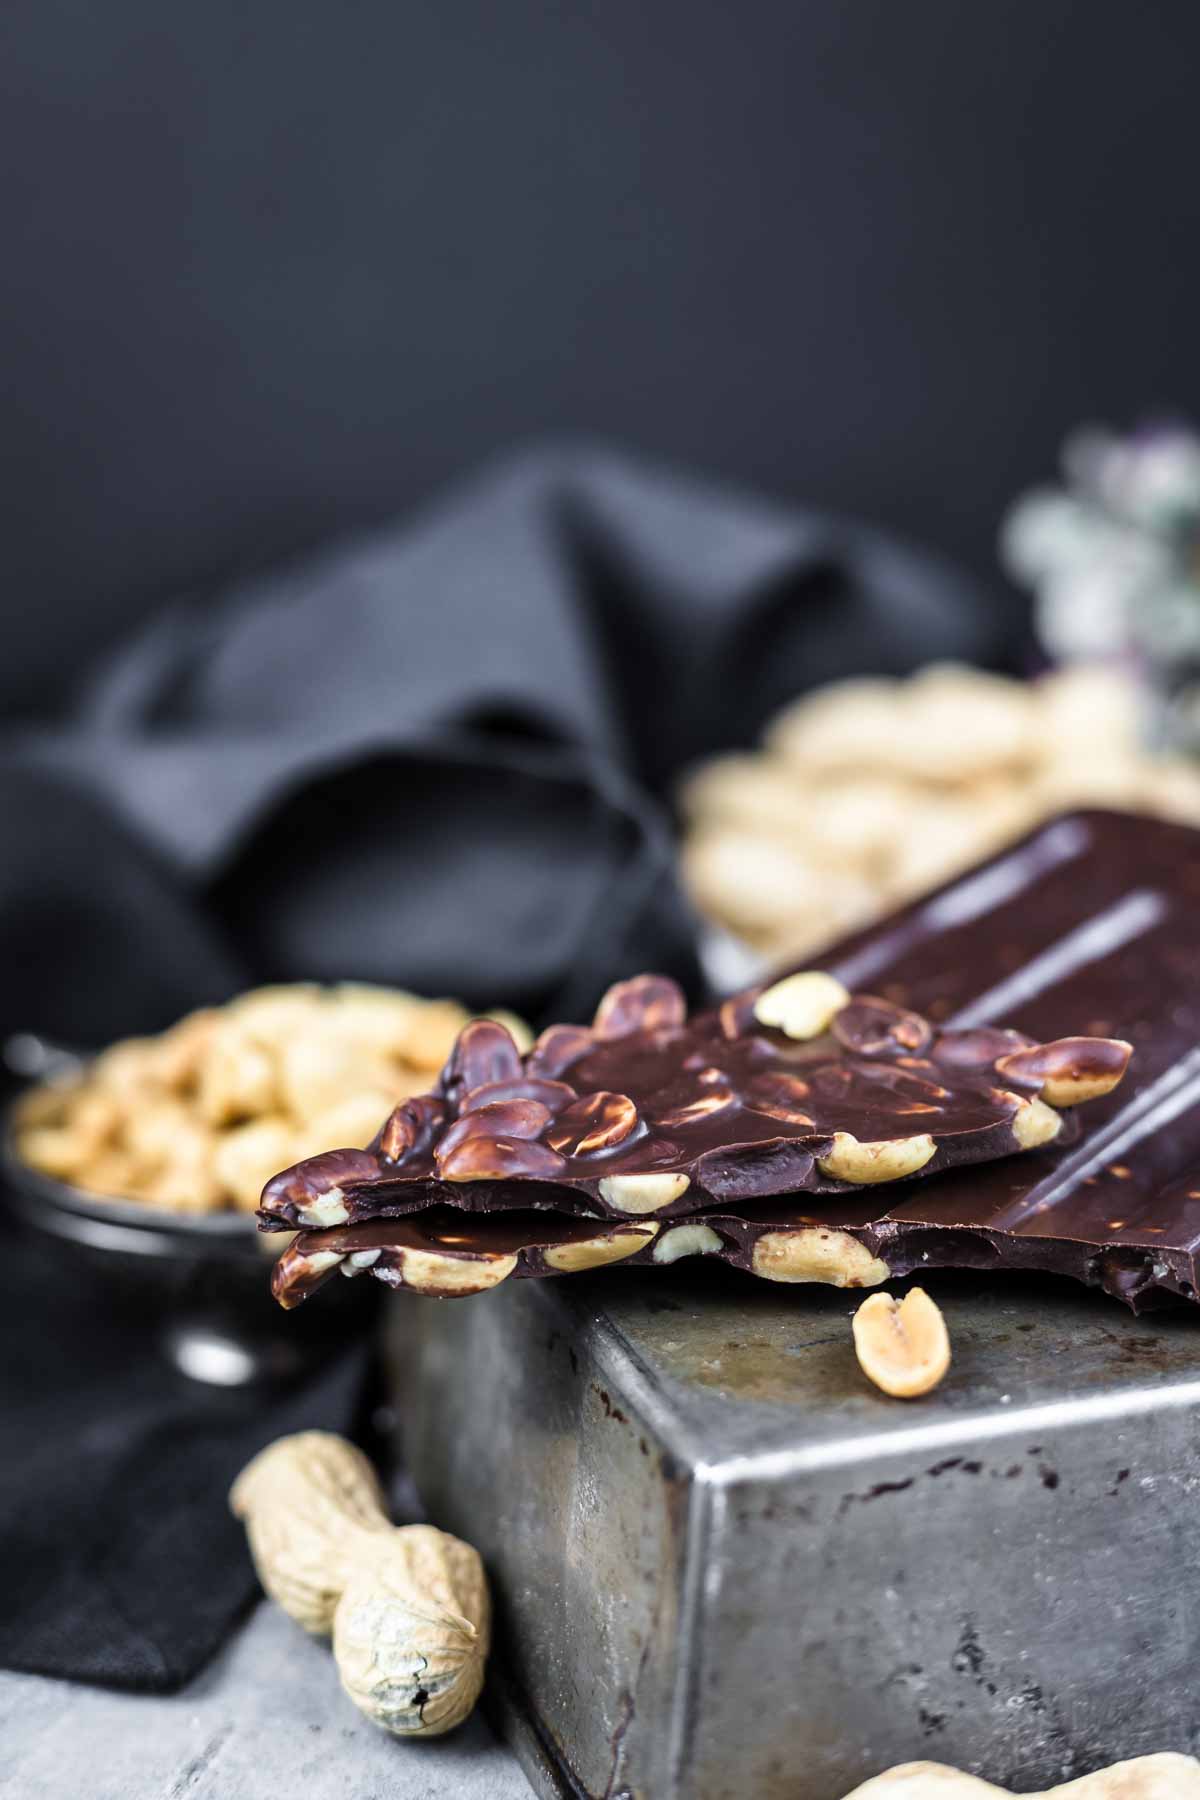 A close-up of dark chocolate bark with nuts.